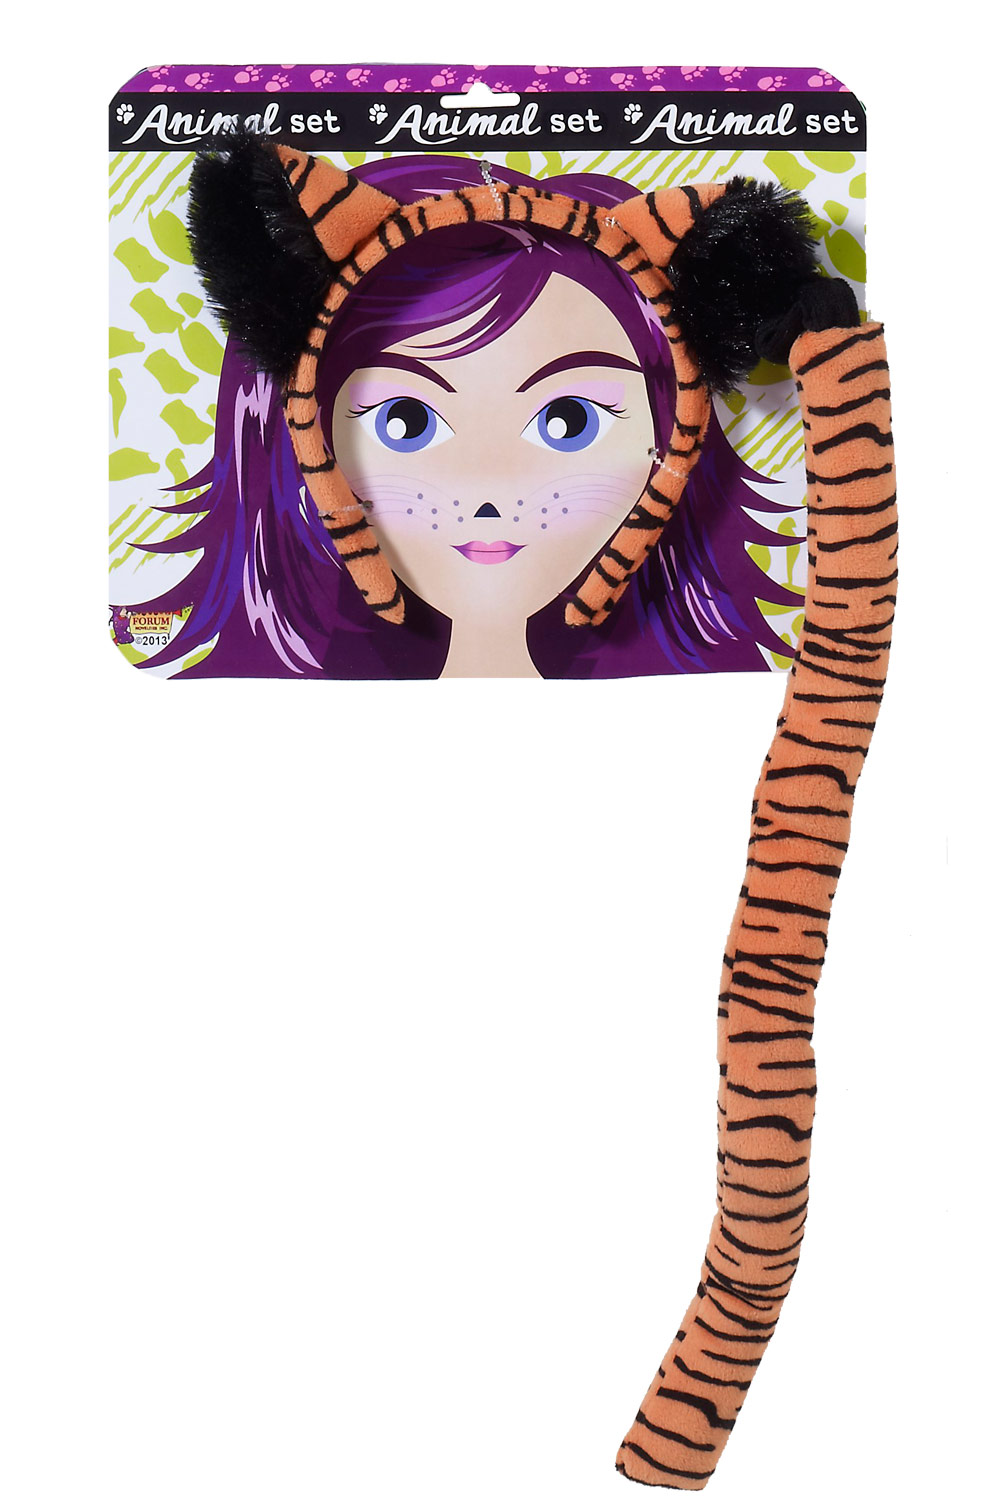 become a wild feline with this tiger costume kit which includes a striped e...